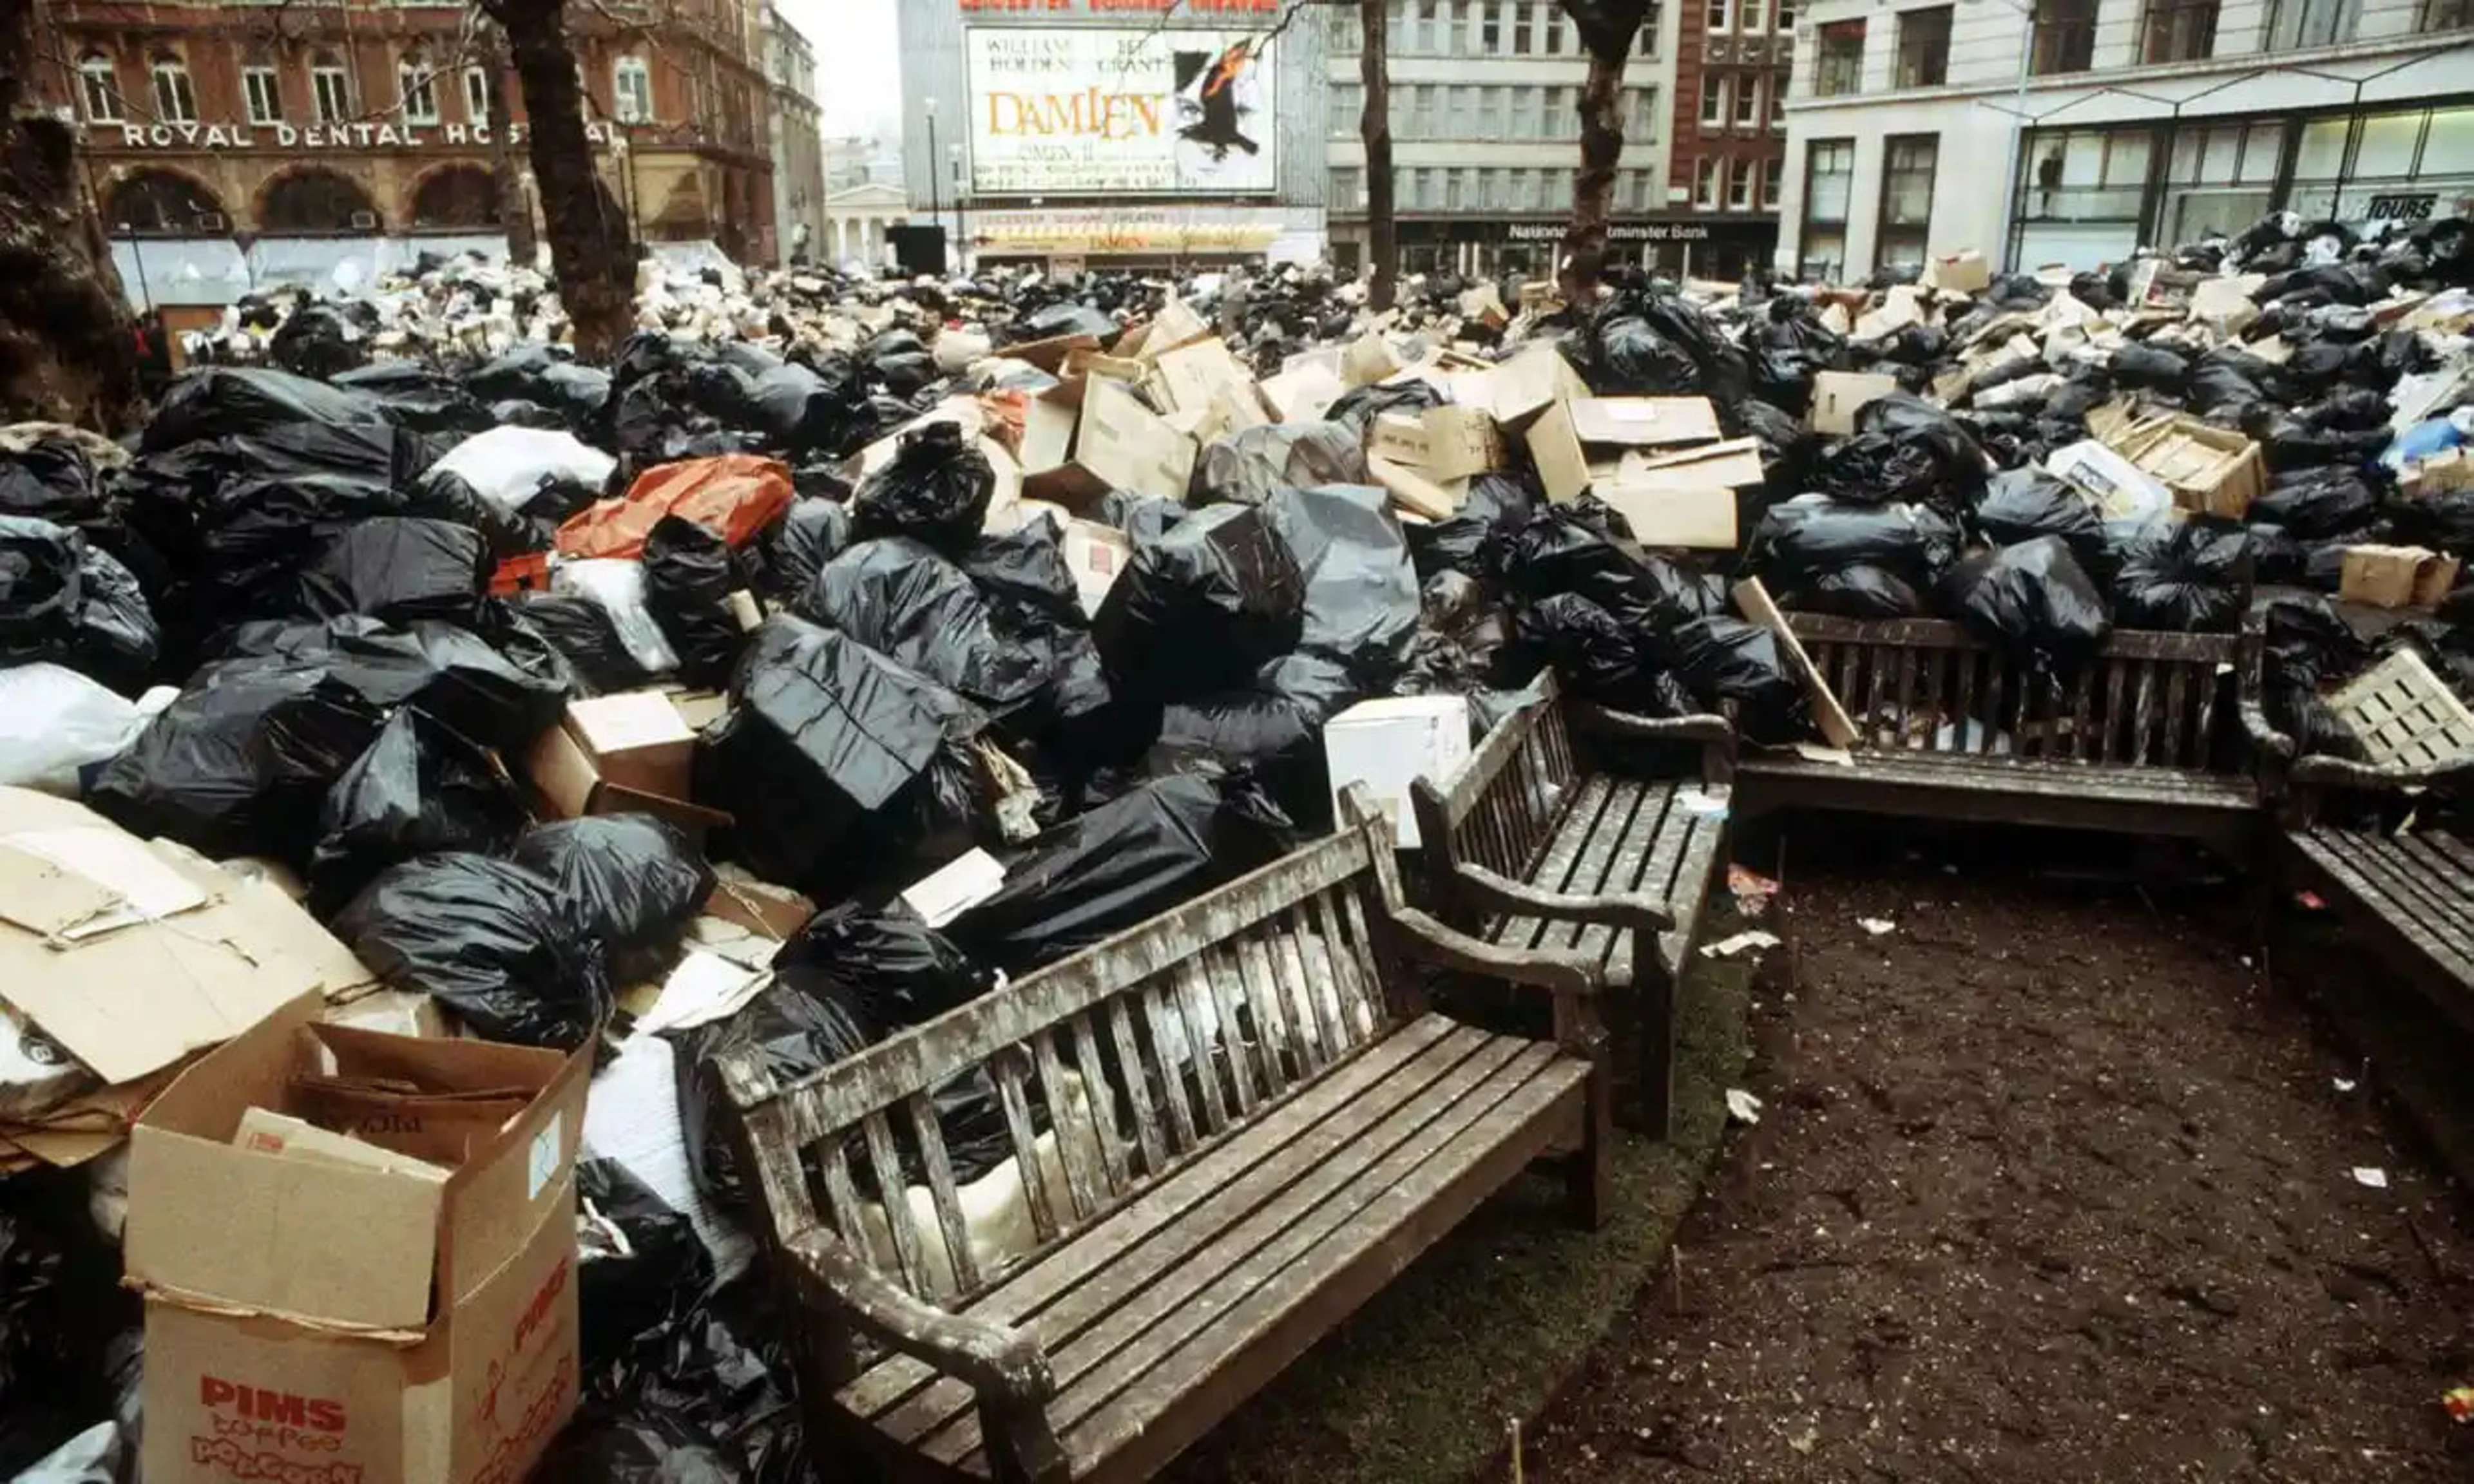 Leicester Square in London filled with rubbish.